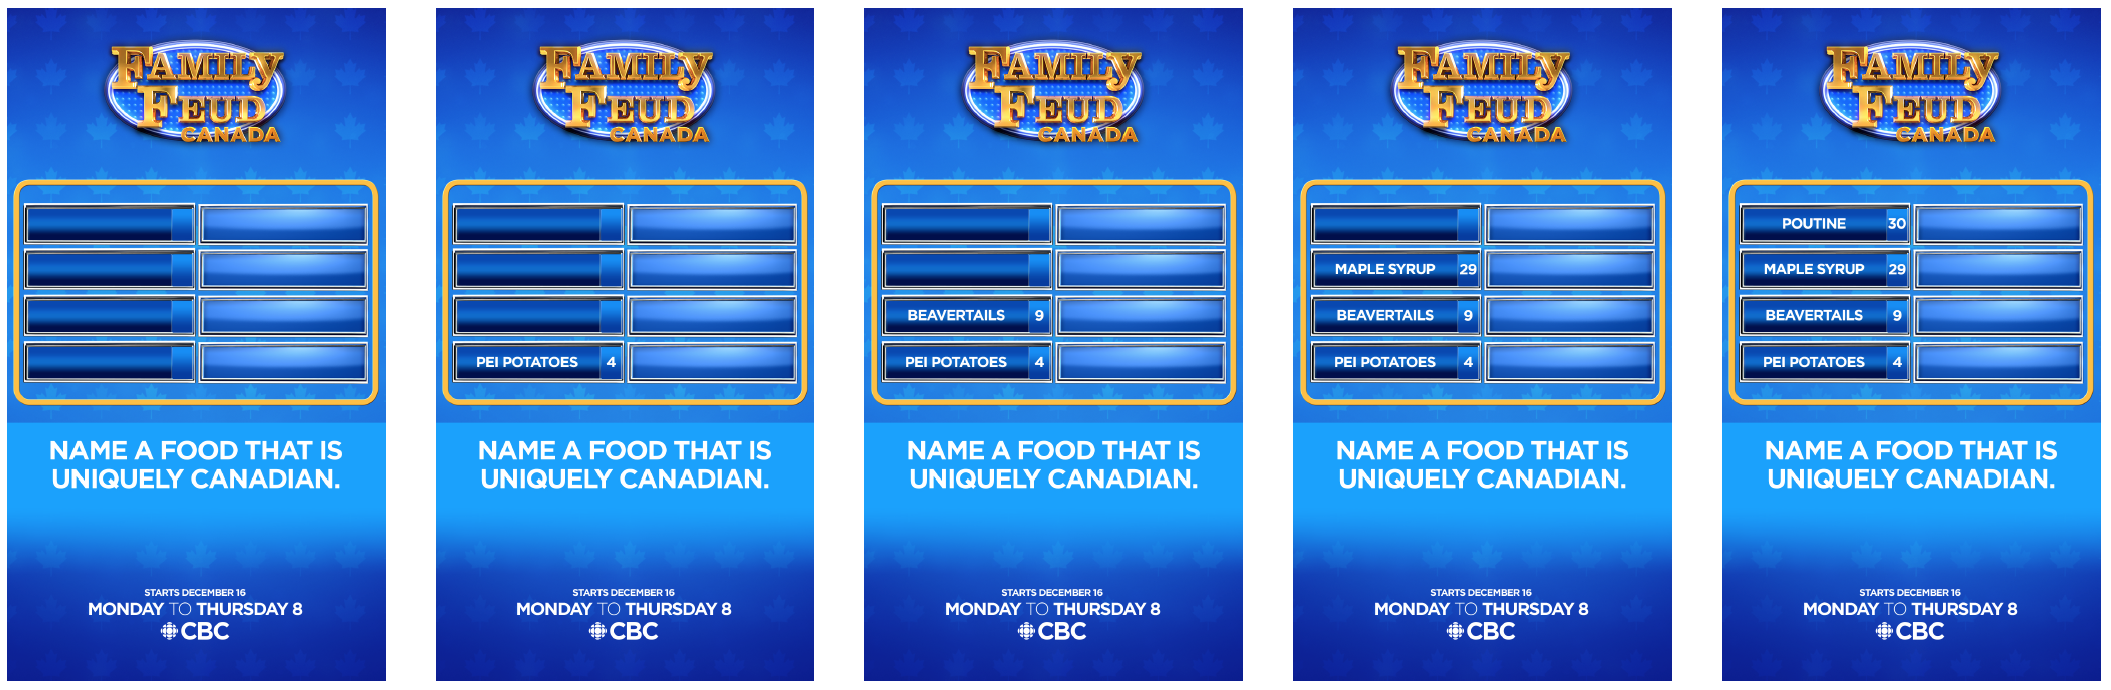 Panels for an Instagram story game that reveals the top 4 foods that are uniquely Canadian.